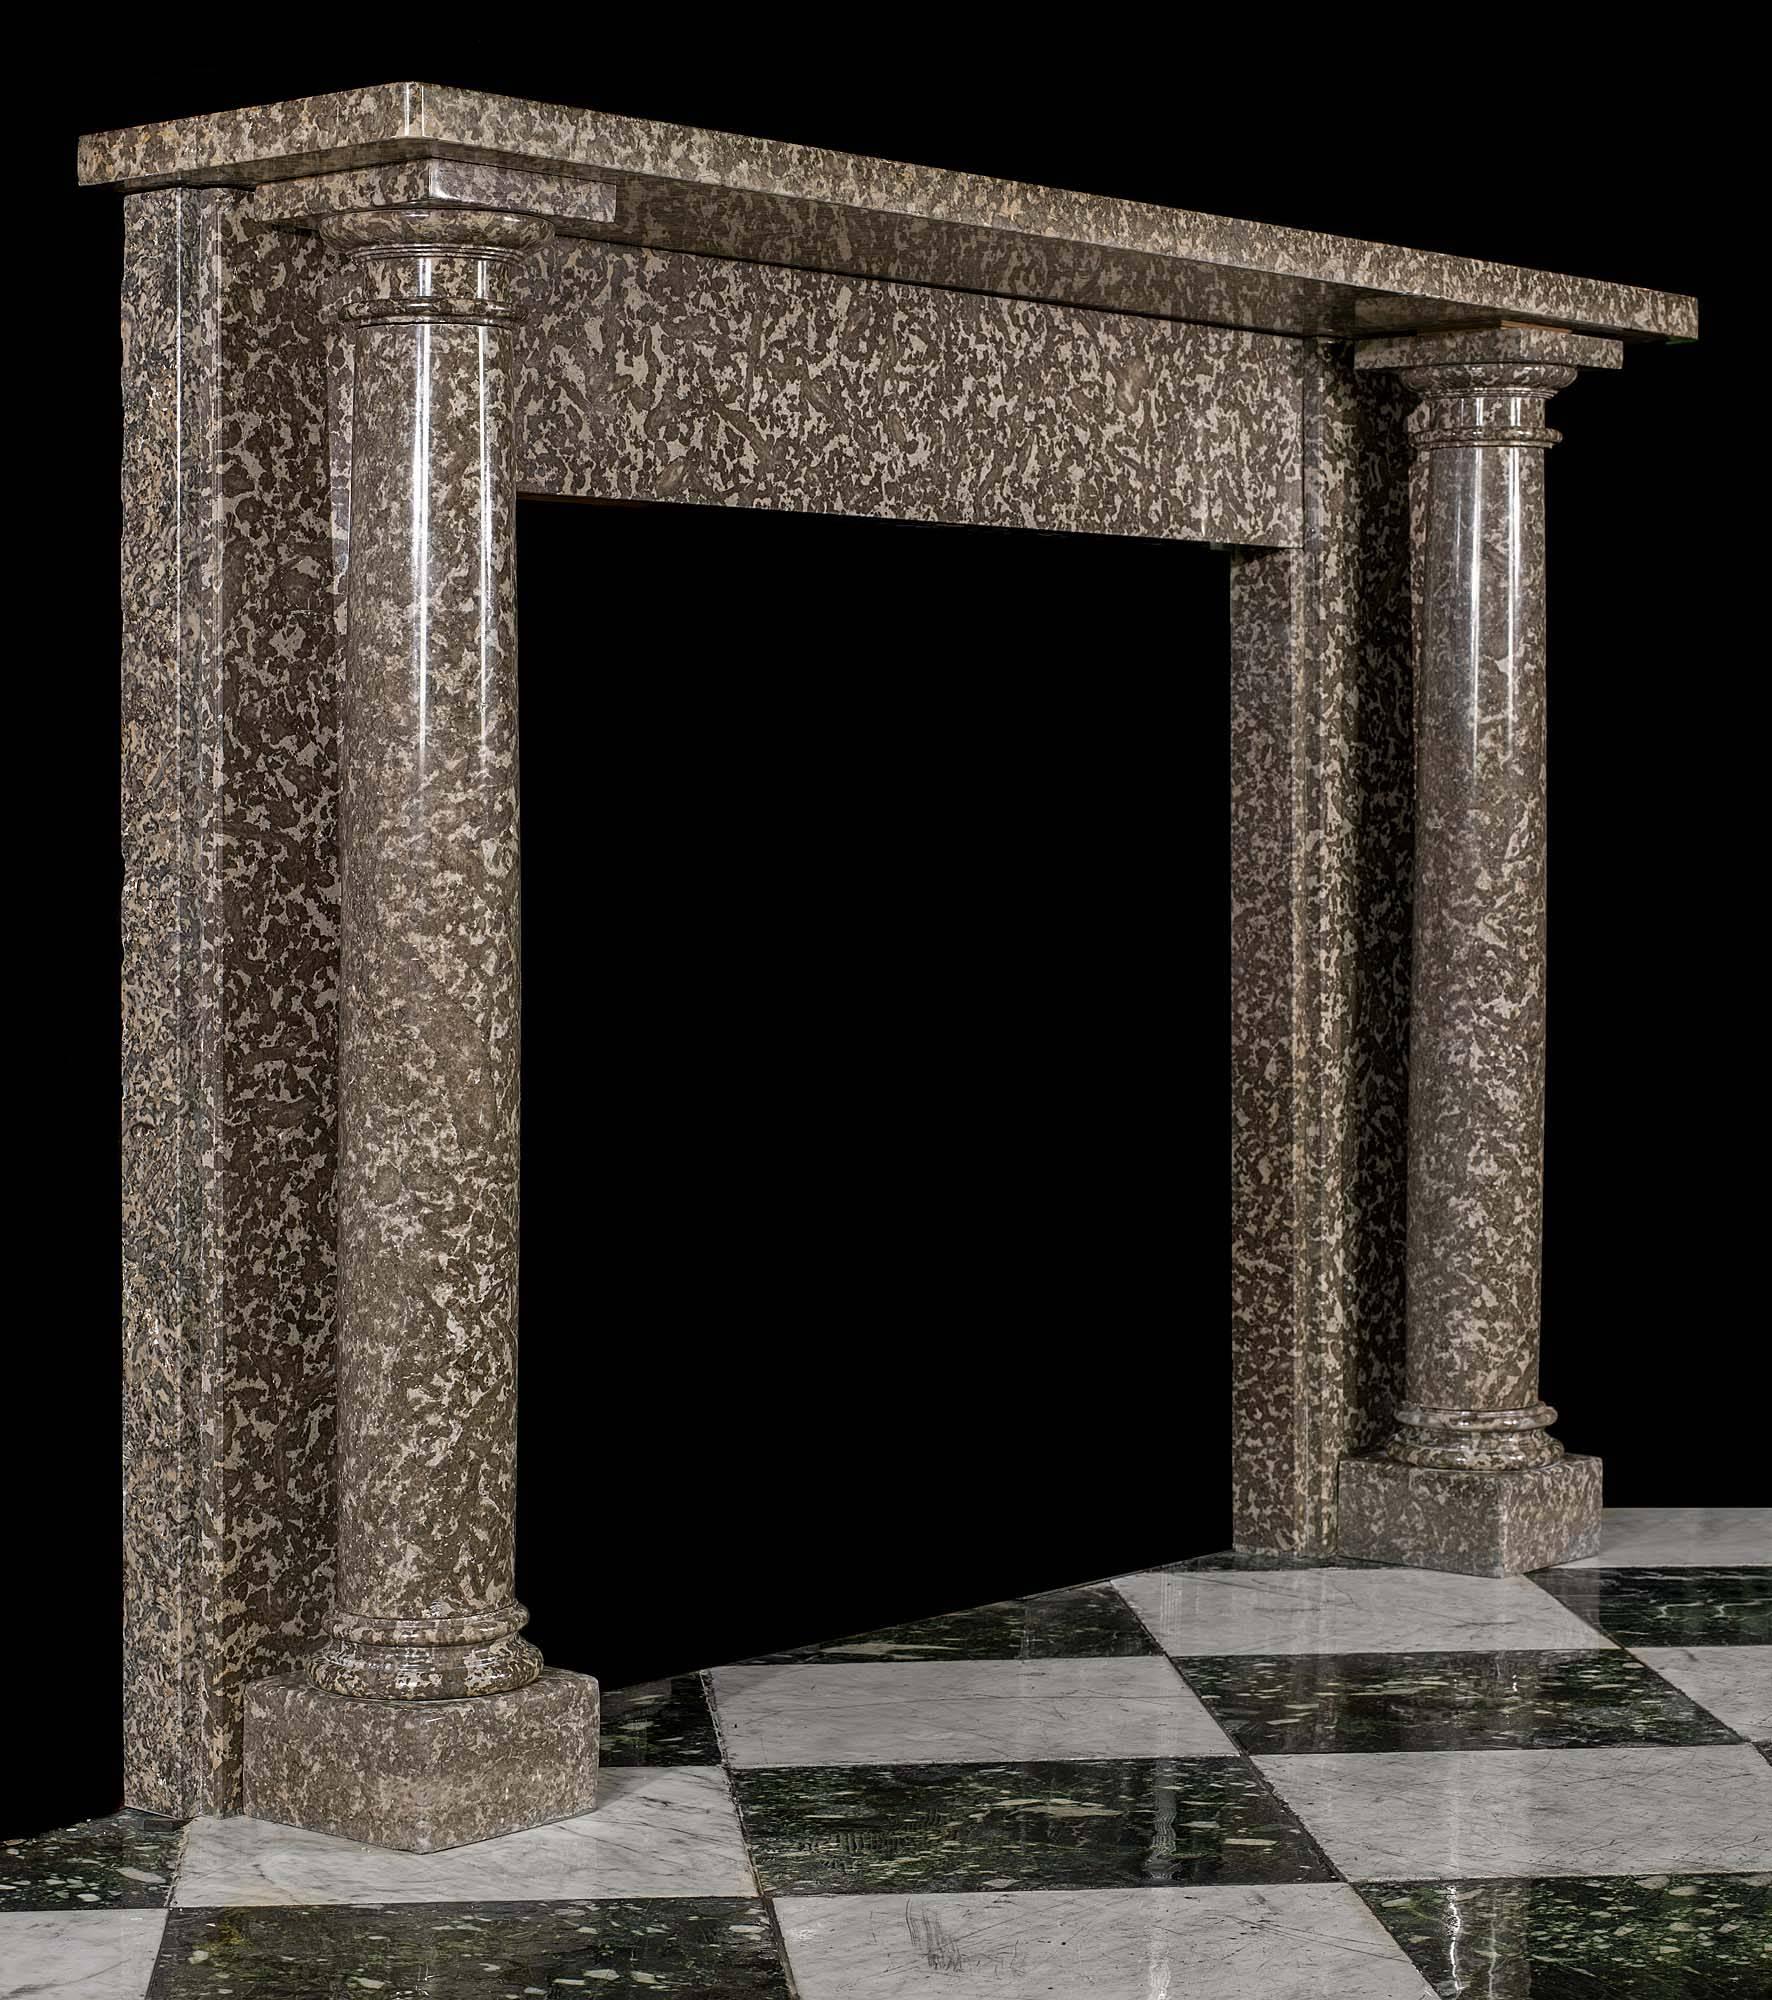 A charmingly understated Regency columned chimneypiece in warm grey fossil marble reminiscent of a leopard’s coat. The full round tapering columns stand free of the jambs and support the simple shelf set above the unadorned frieze.
English, circa